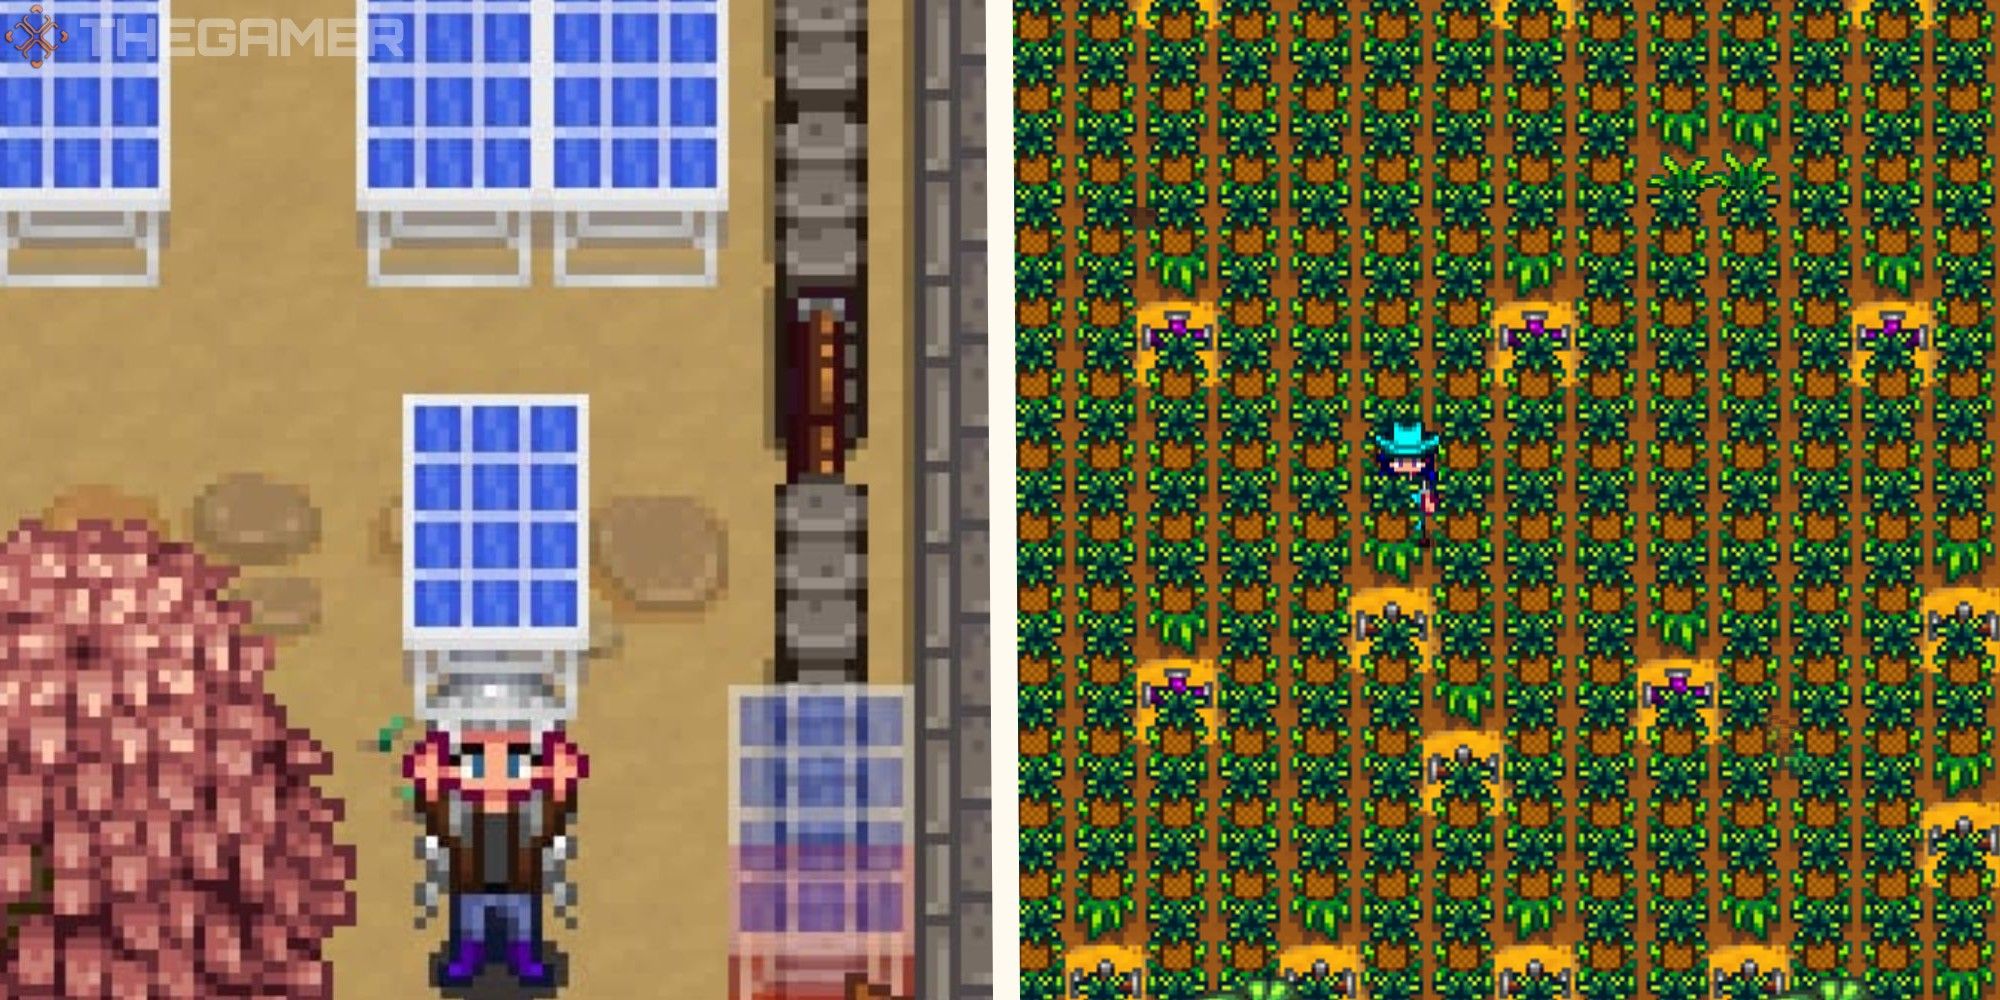 image of player holding solar panel next to image of player standing among field of pineapples